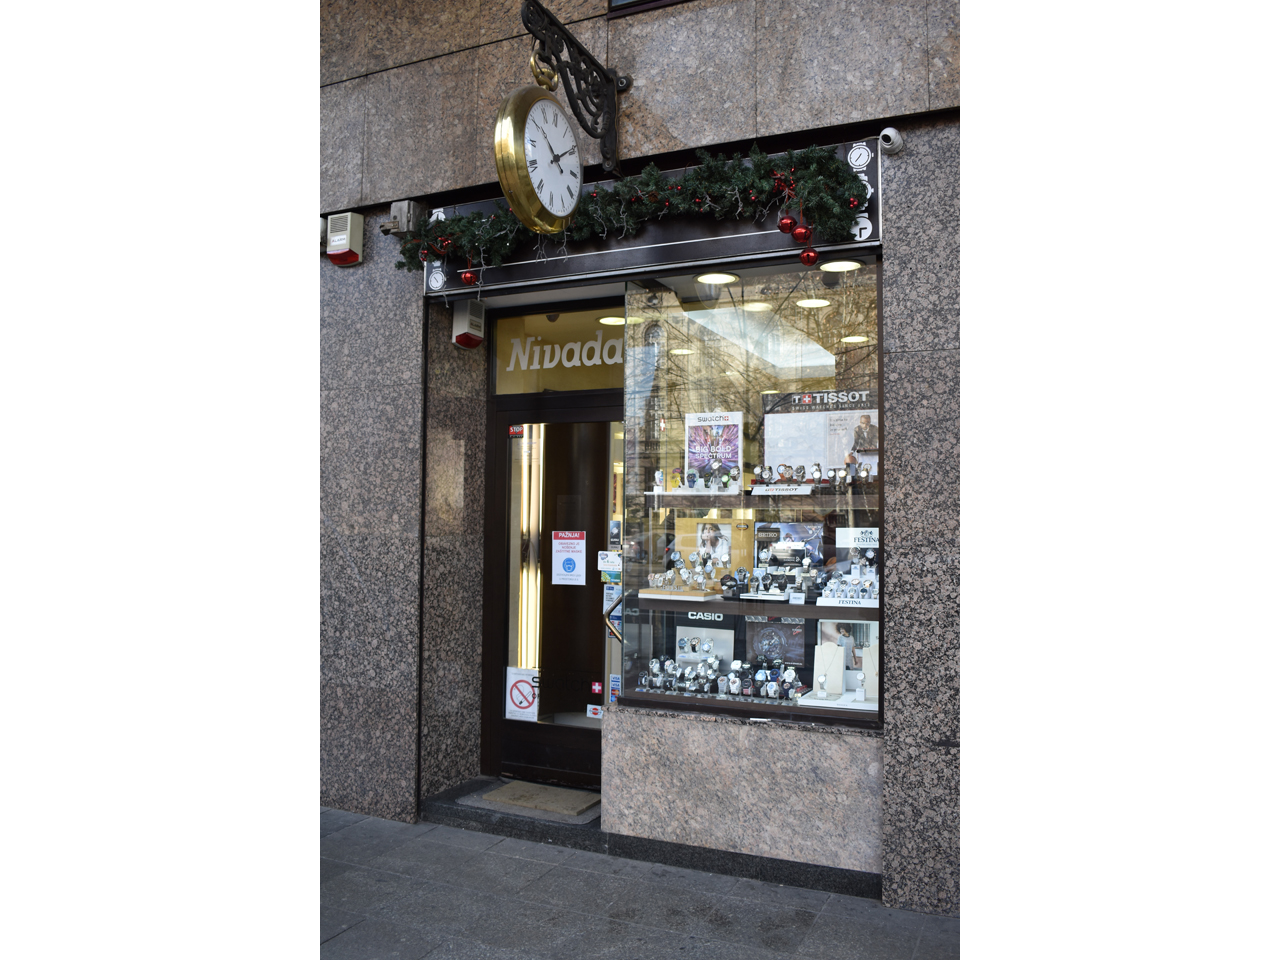 GENERAL PRODUCT STORE NIVADA Watchmakers Beograd